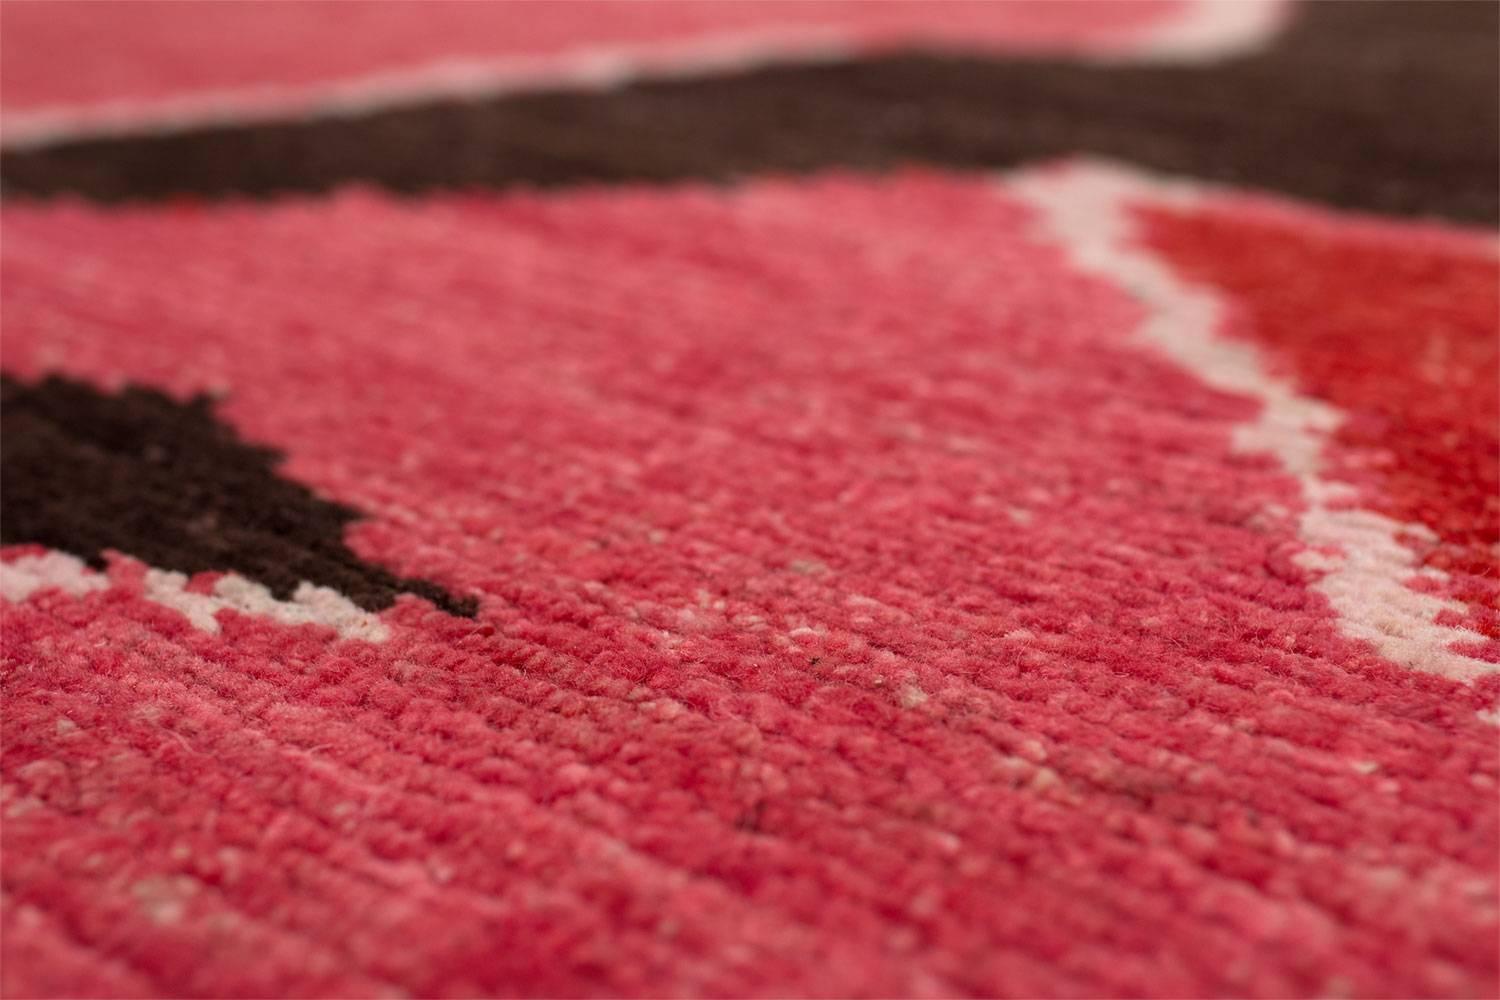 Hand-Woven Contemporary Textured Red And Pink Rug Handwoven Wool